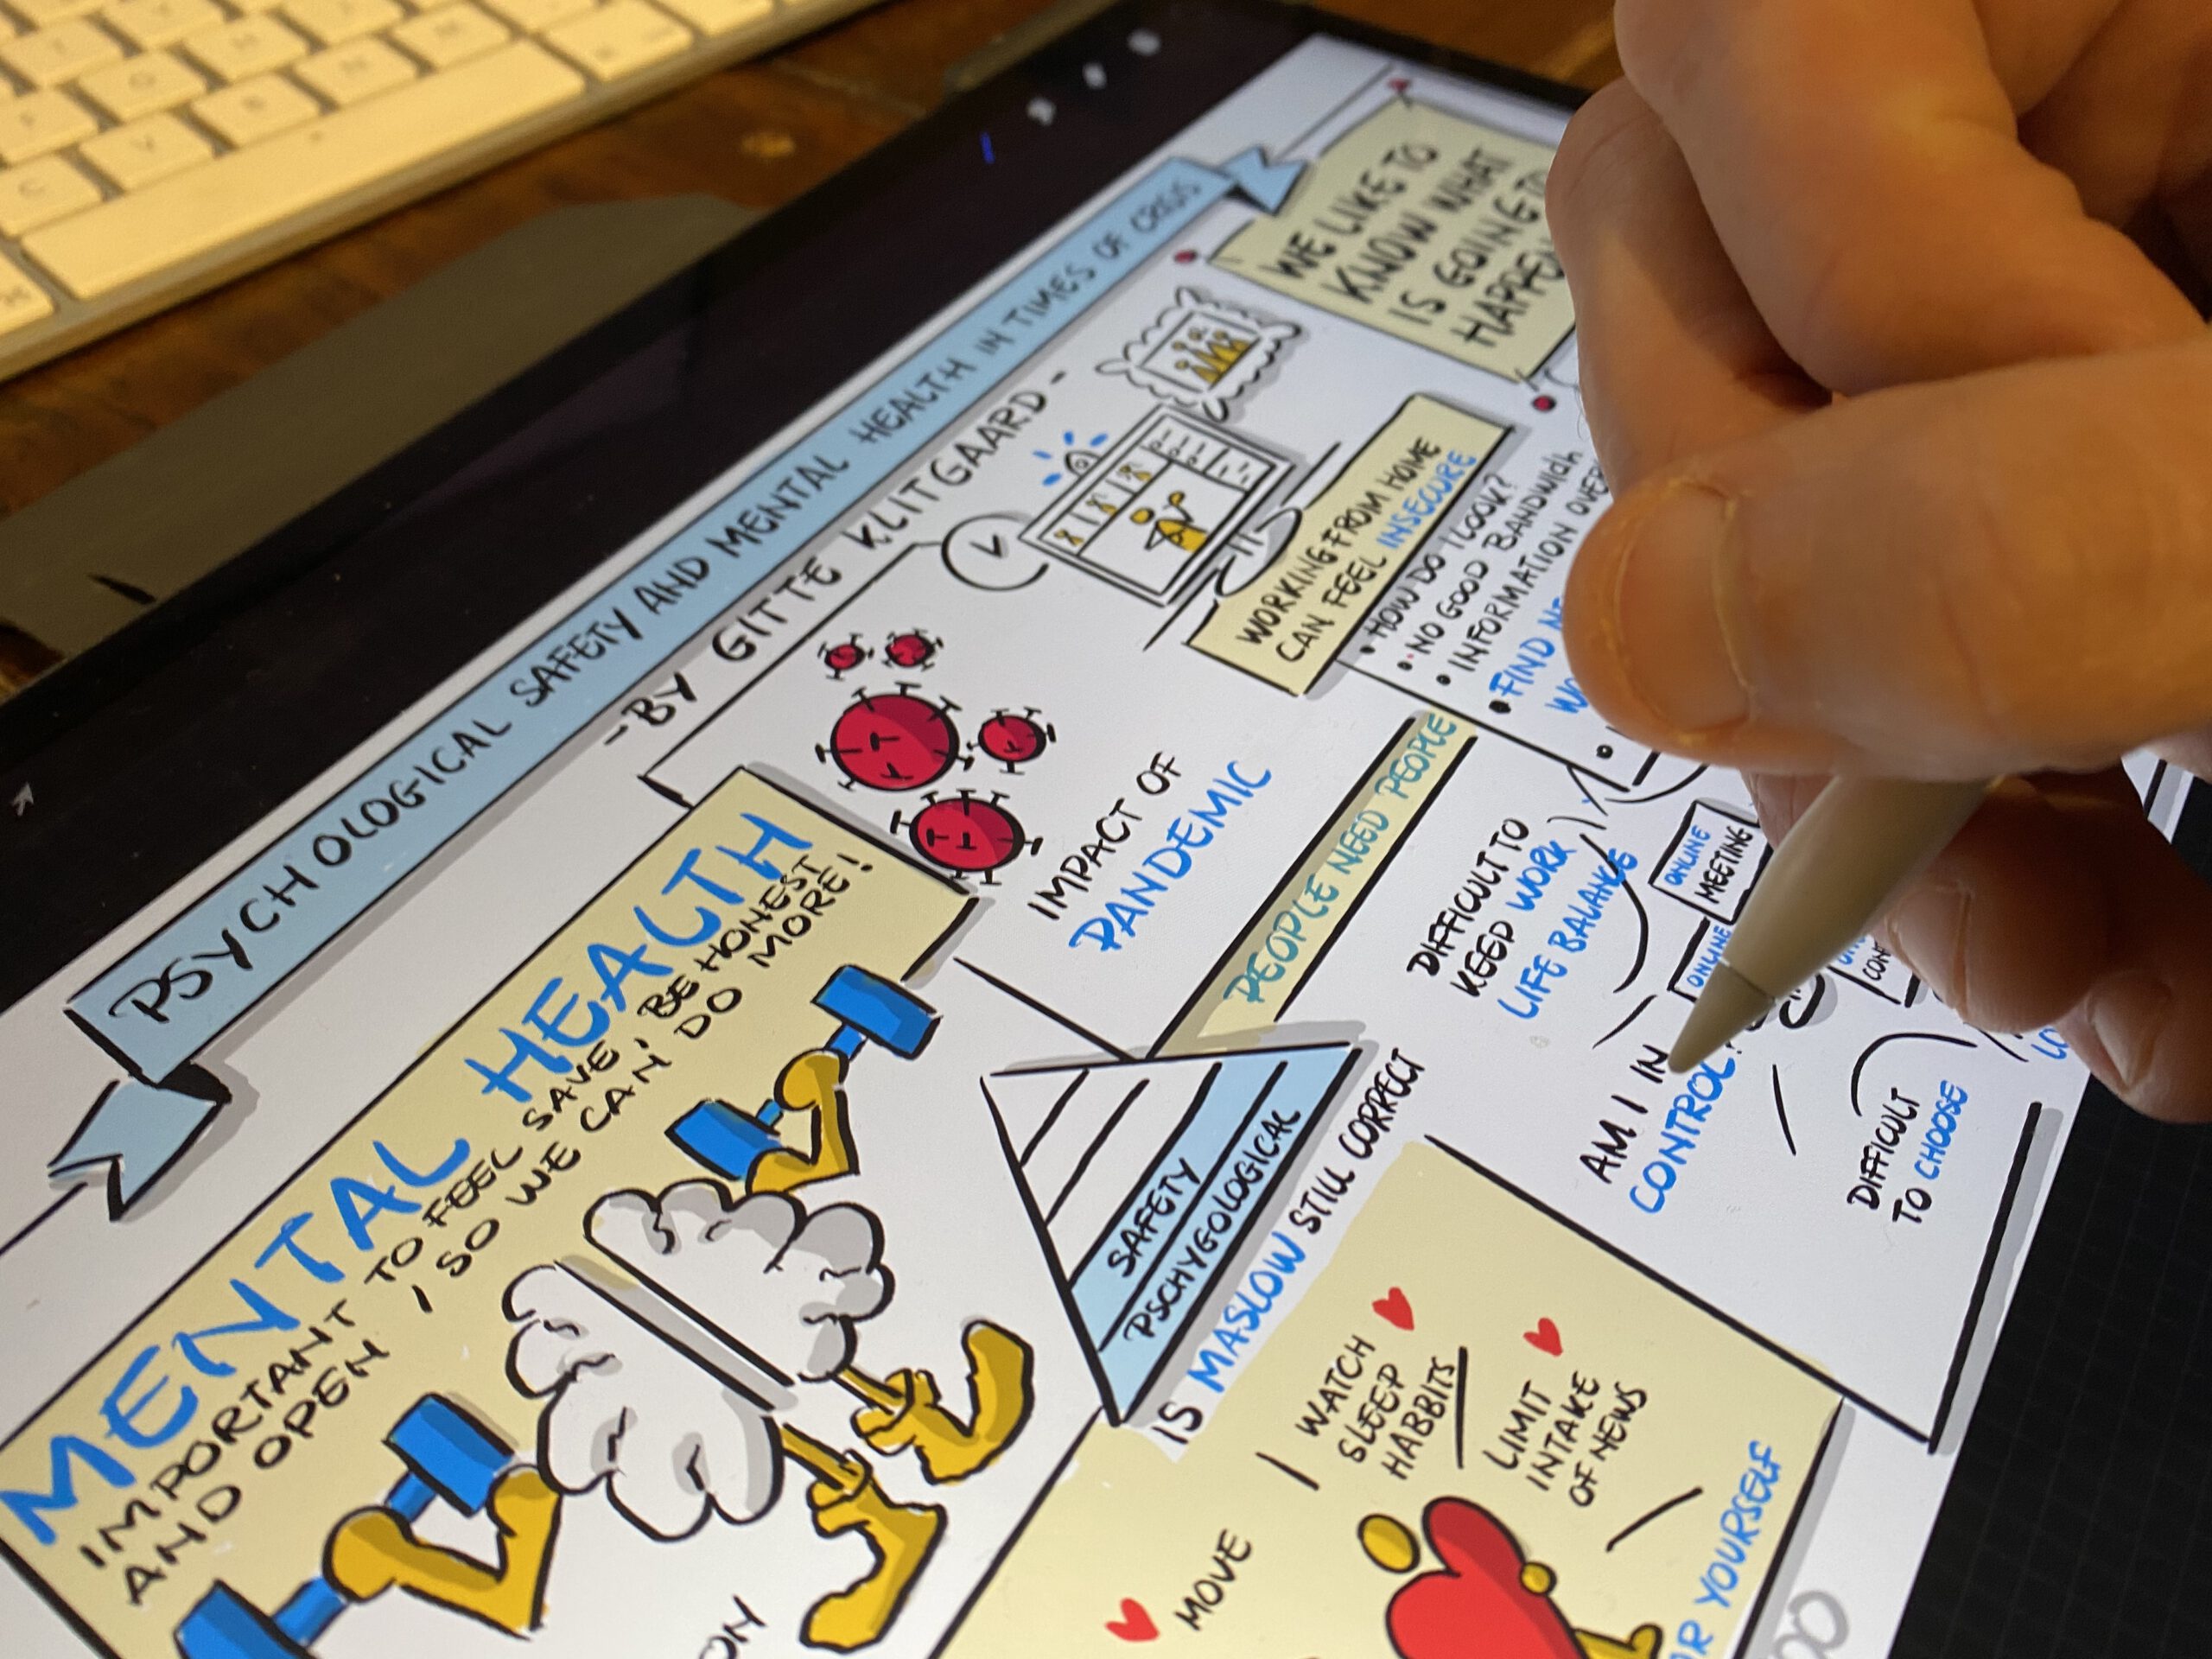 Example of Online Graphic Recording by Henk Wijnands